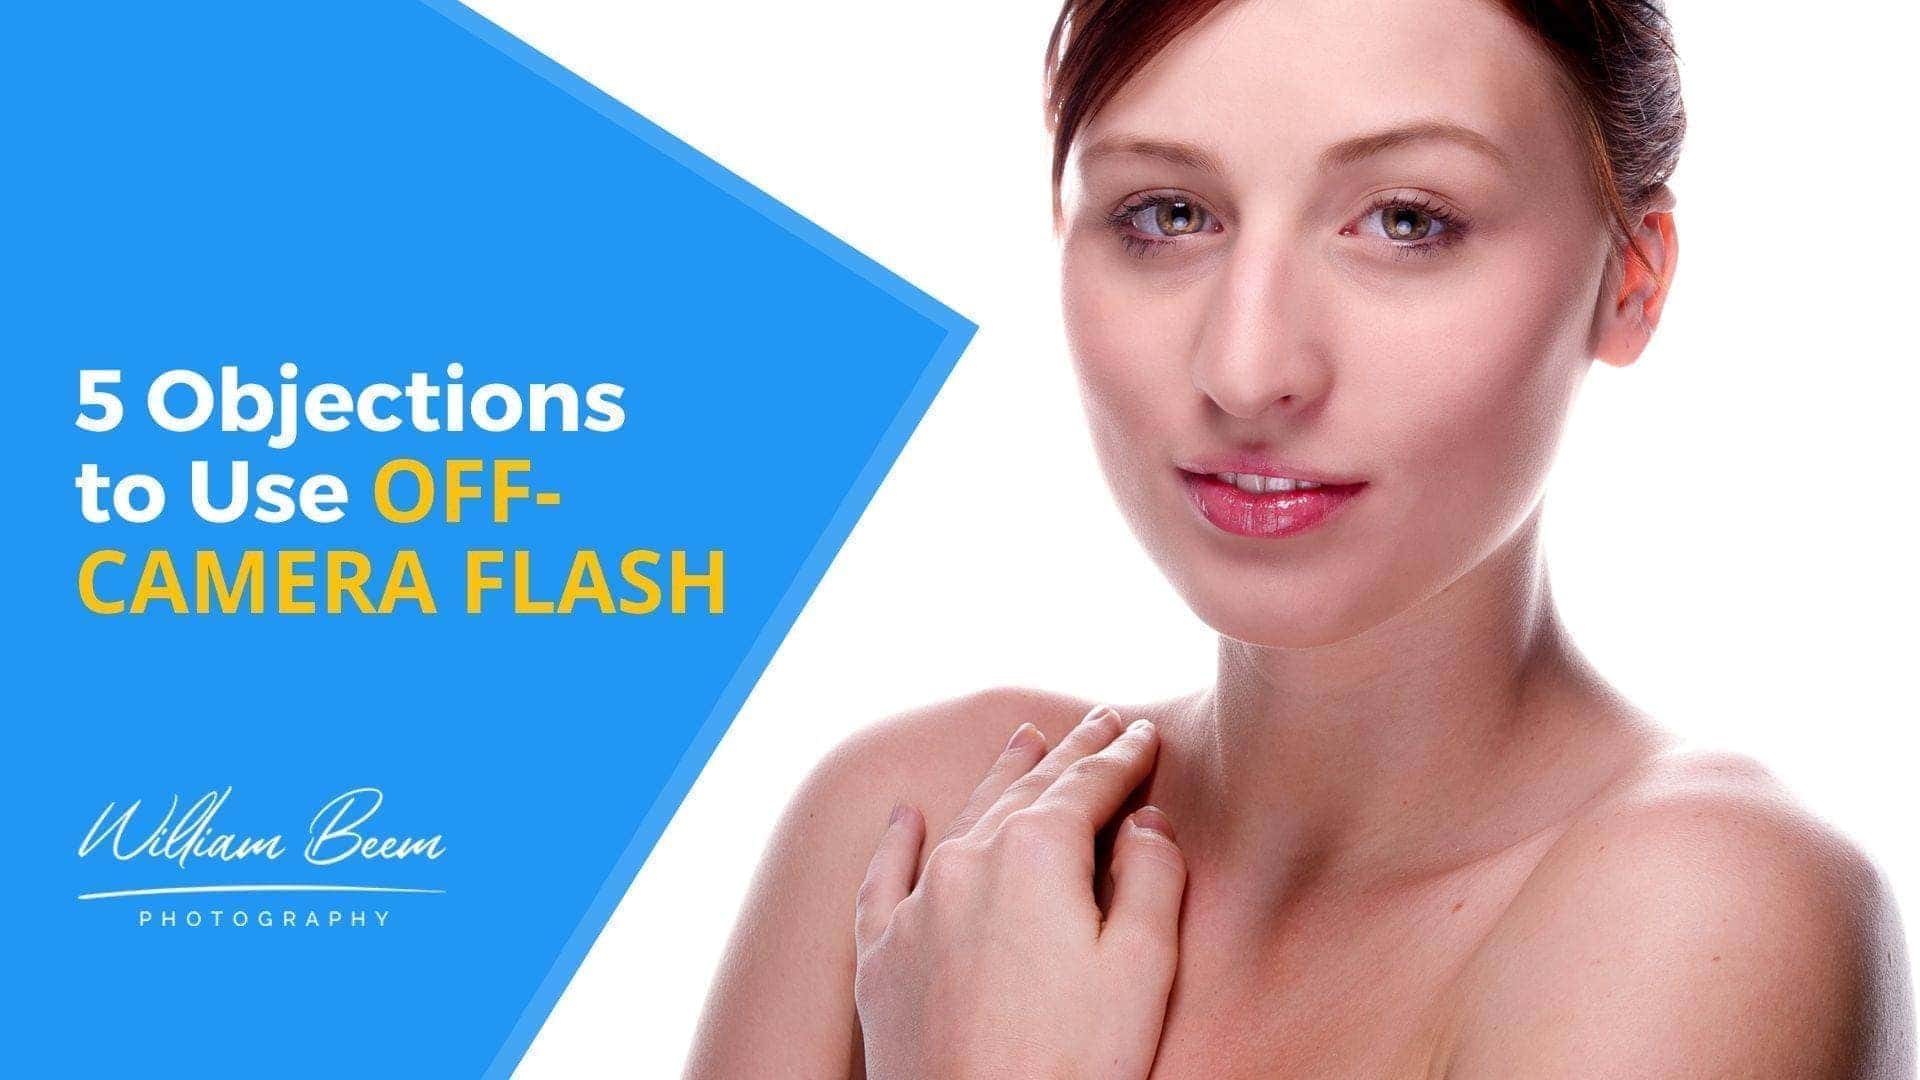 5 Objections to Use Off-Camera Flash